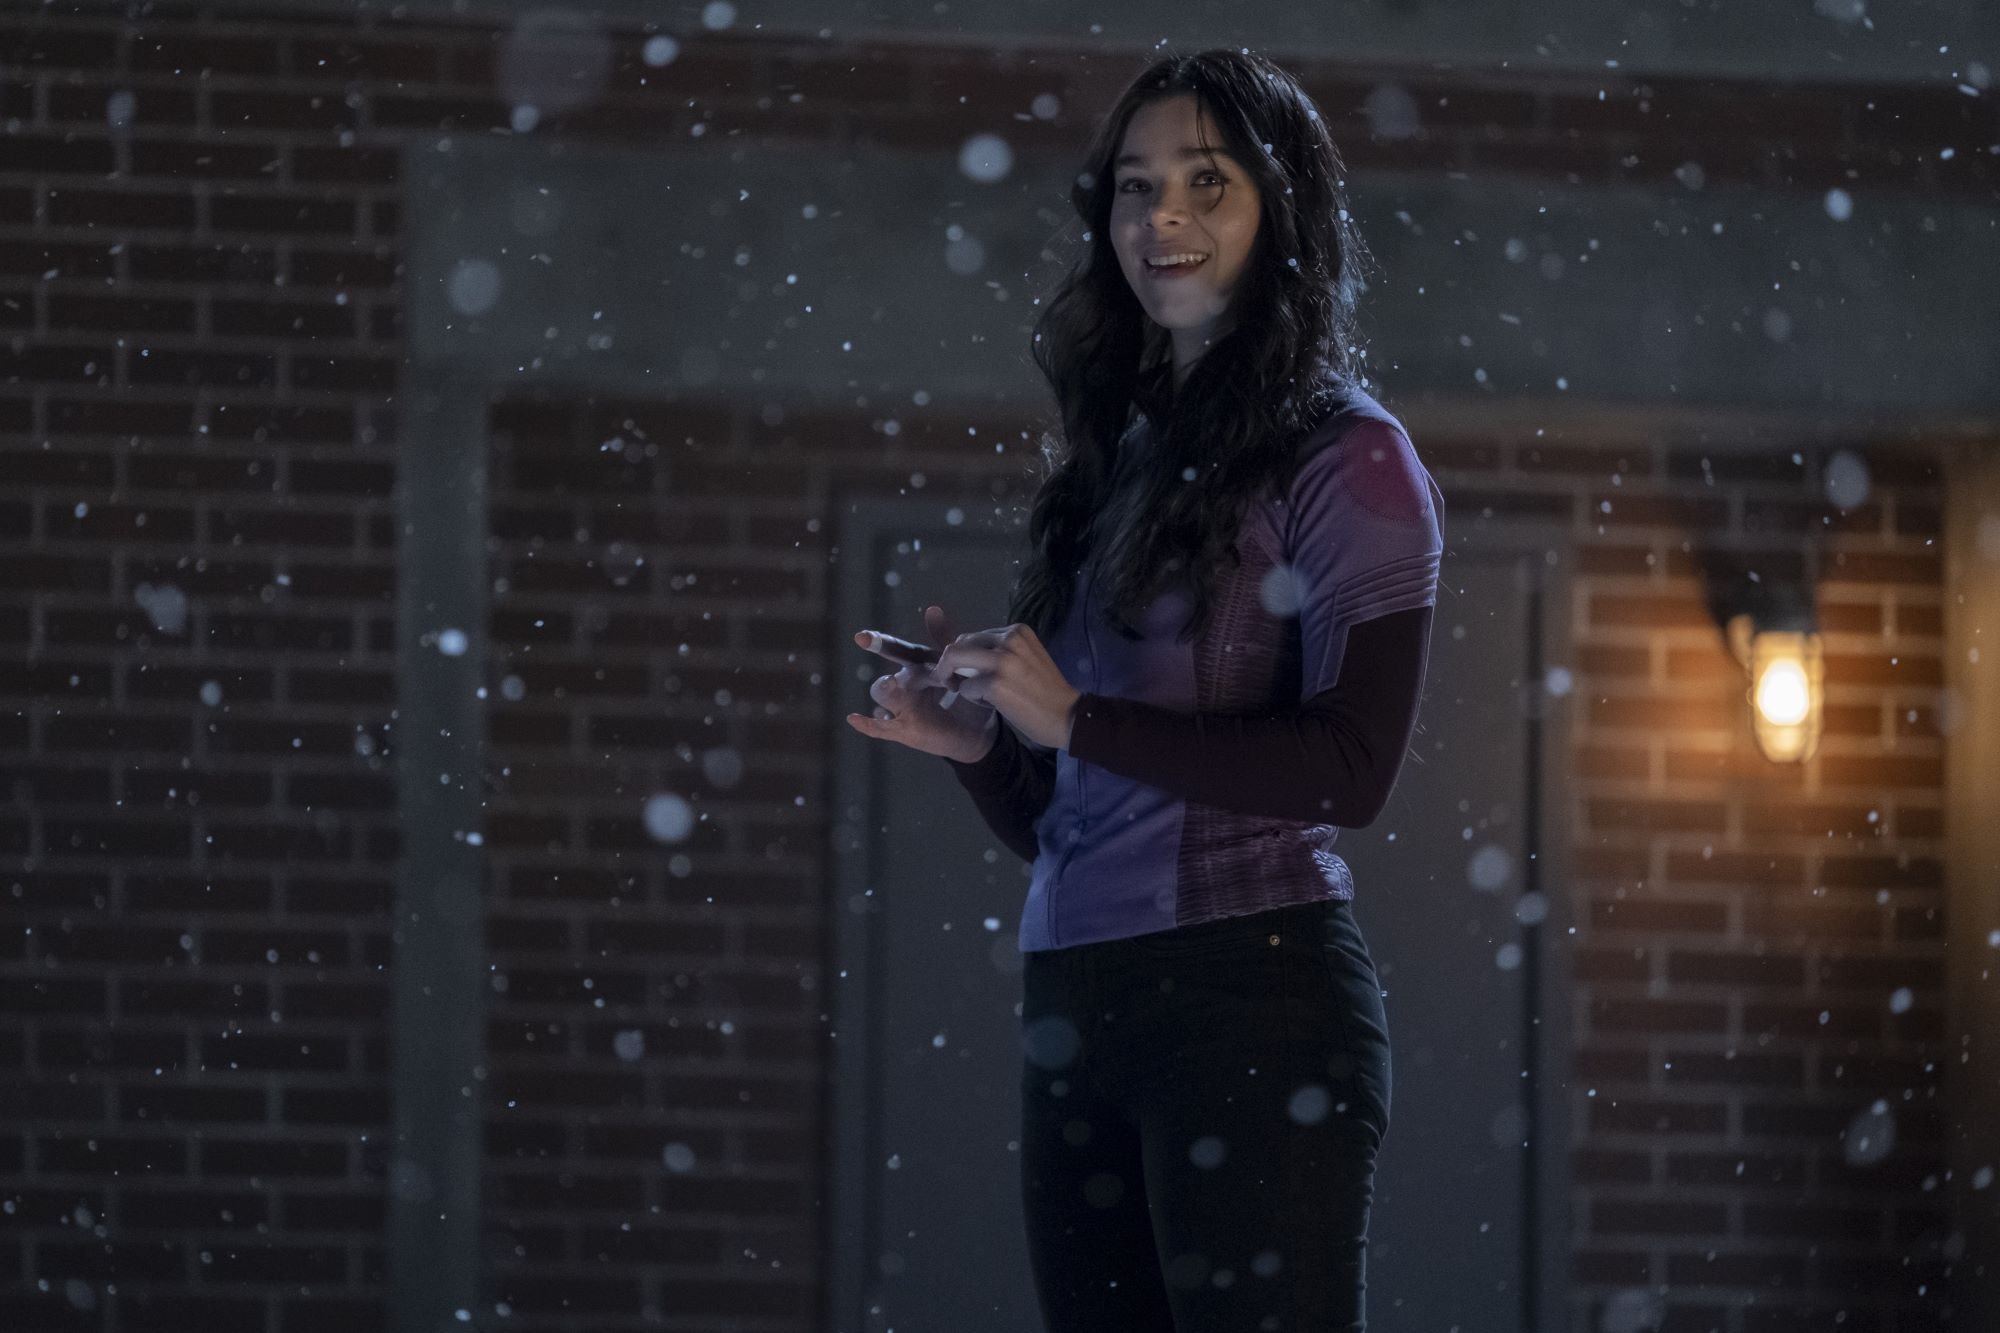 'Hawkeye' star Hailee Steinfeld, in character as Kate Bishop, wears a purple and black long-sleeved shirt and black pants. She smiles as snow comes down around her. Steinfeld can be seen in the new 'Hawkeye' trailer.